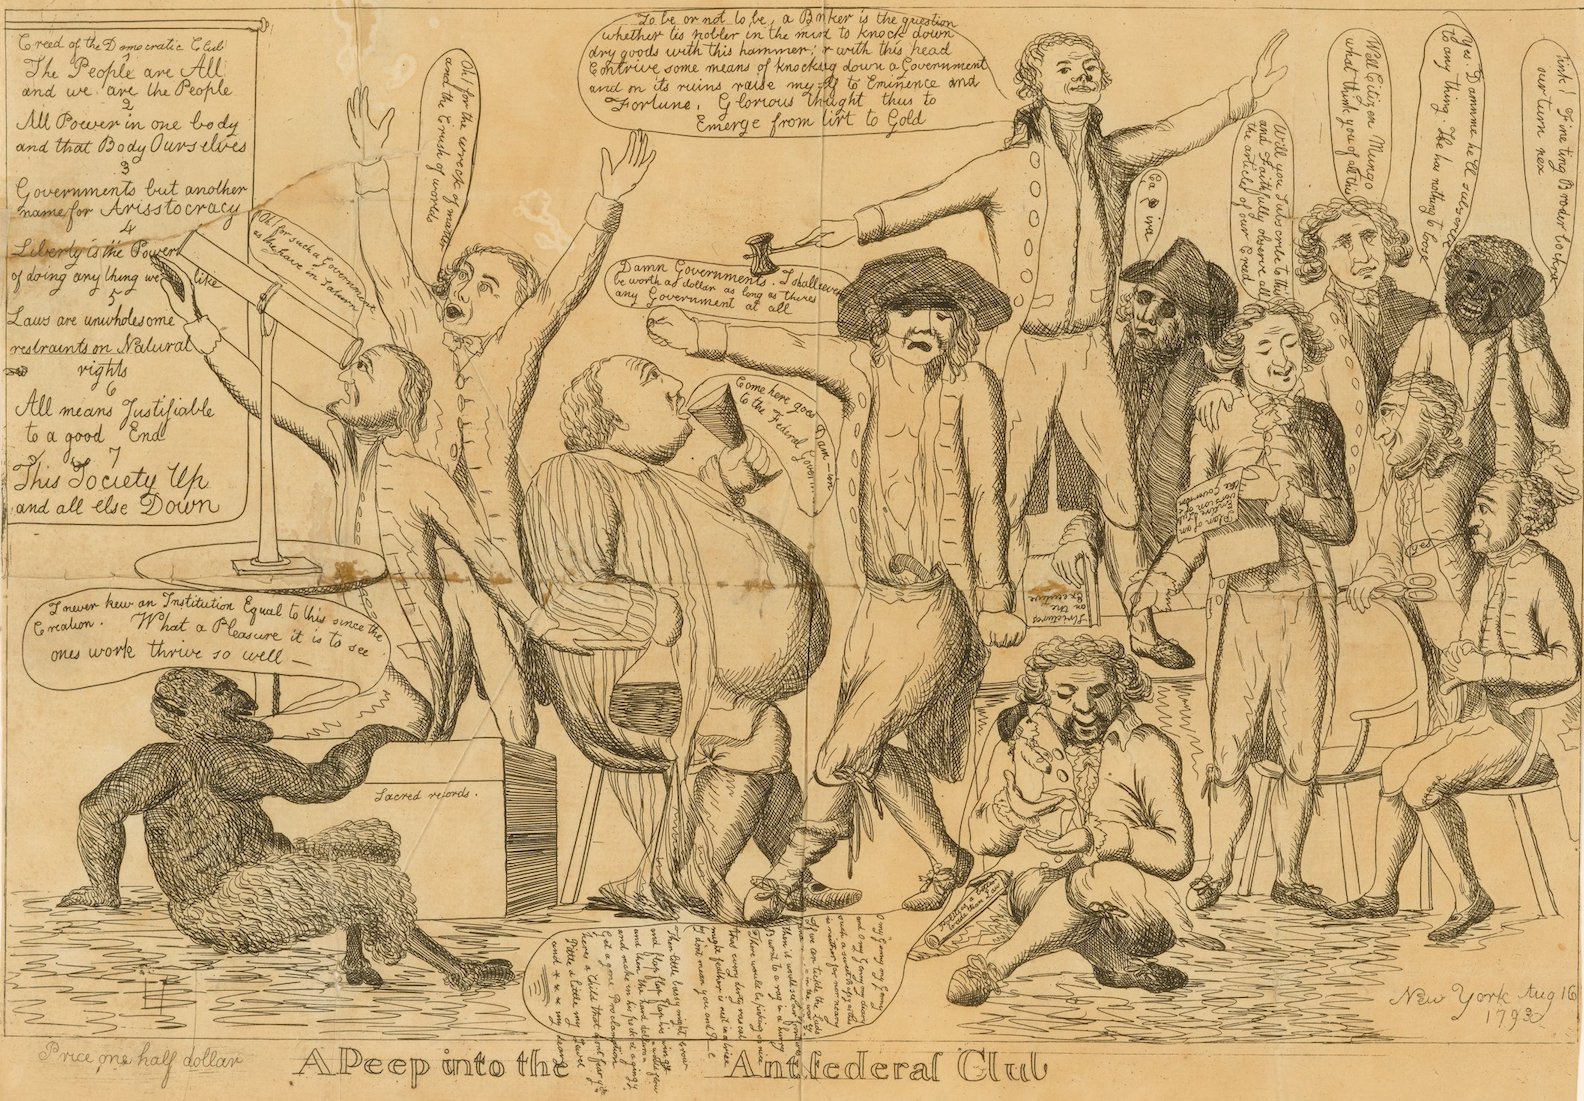 political cartoon depicting caricatures of types of people who aligned themselves with the Anti-Federalists